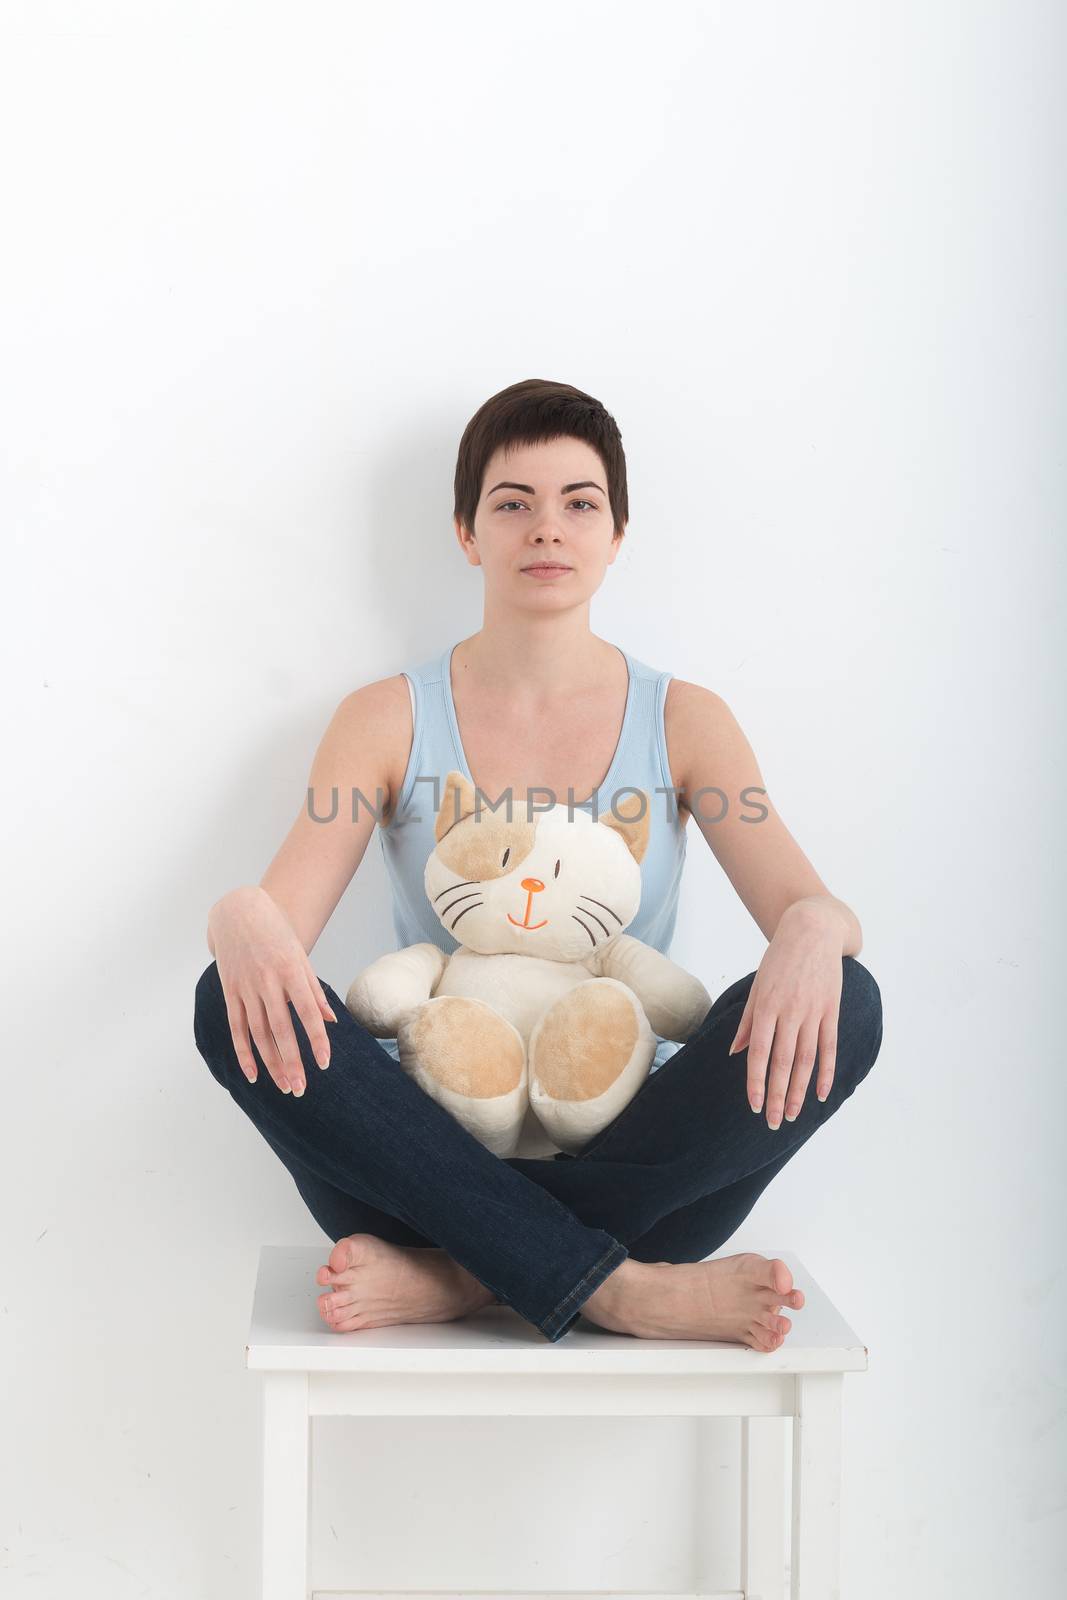 Young attractive smiling woman practicing yoga, sitting in Half Lotus exercise Ardha Padmasana pose, working out wearing dark bleu jeans indoor full length, white plush toy cat on her lap.